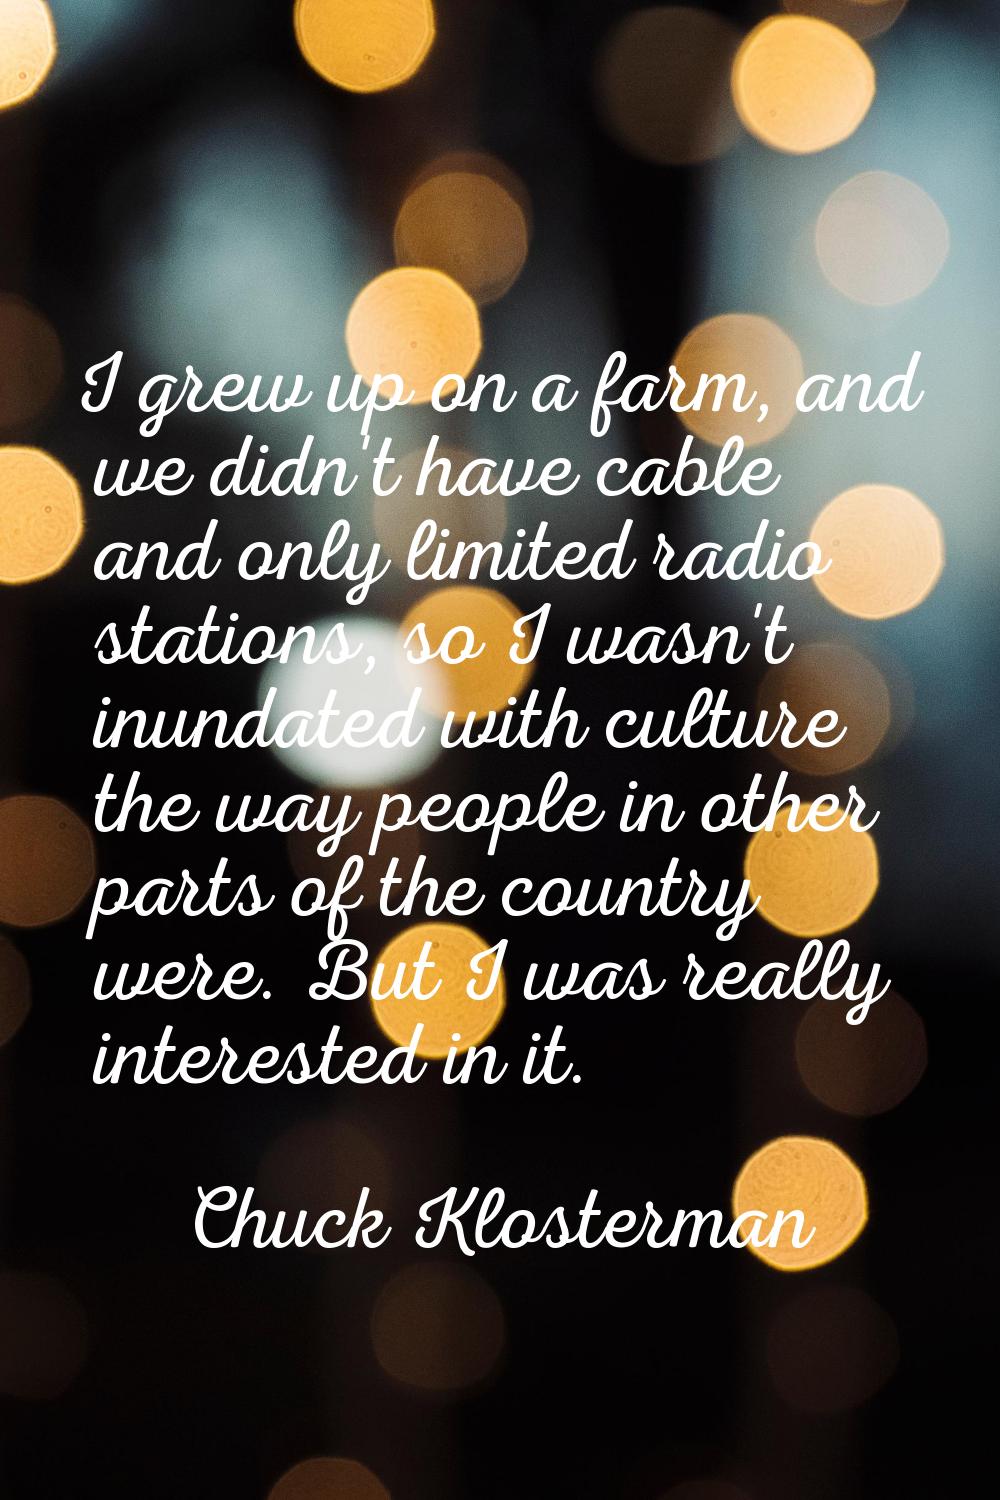 I grew up on a farm, and we didn't have cable and only limited radio stations, so I wasn't inundate